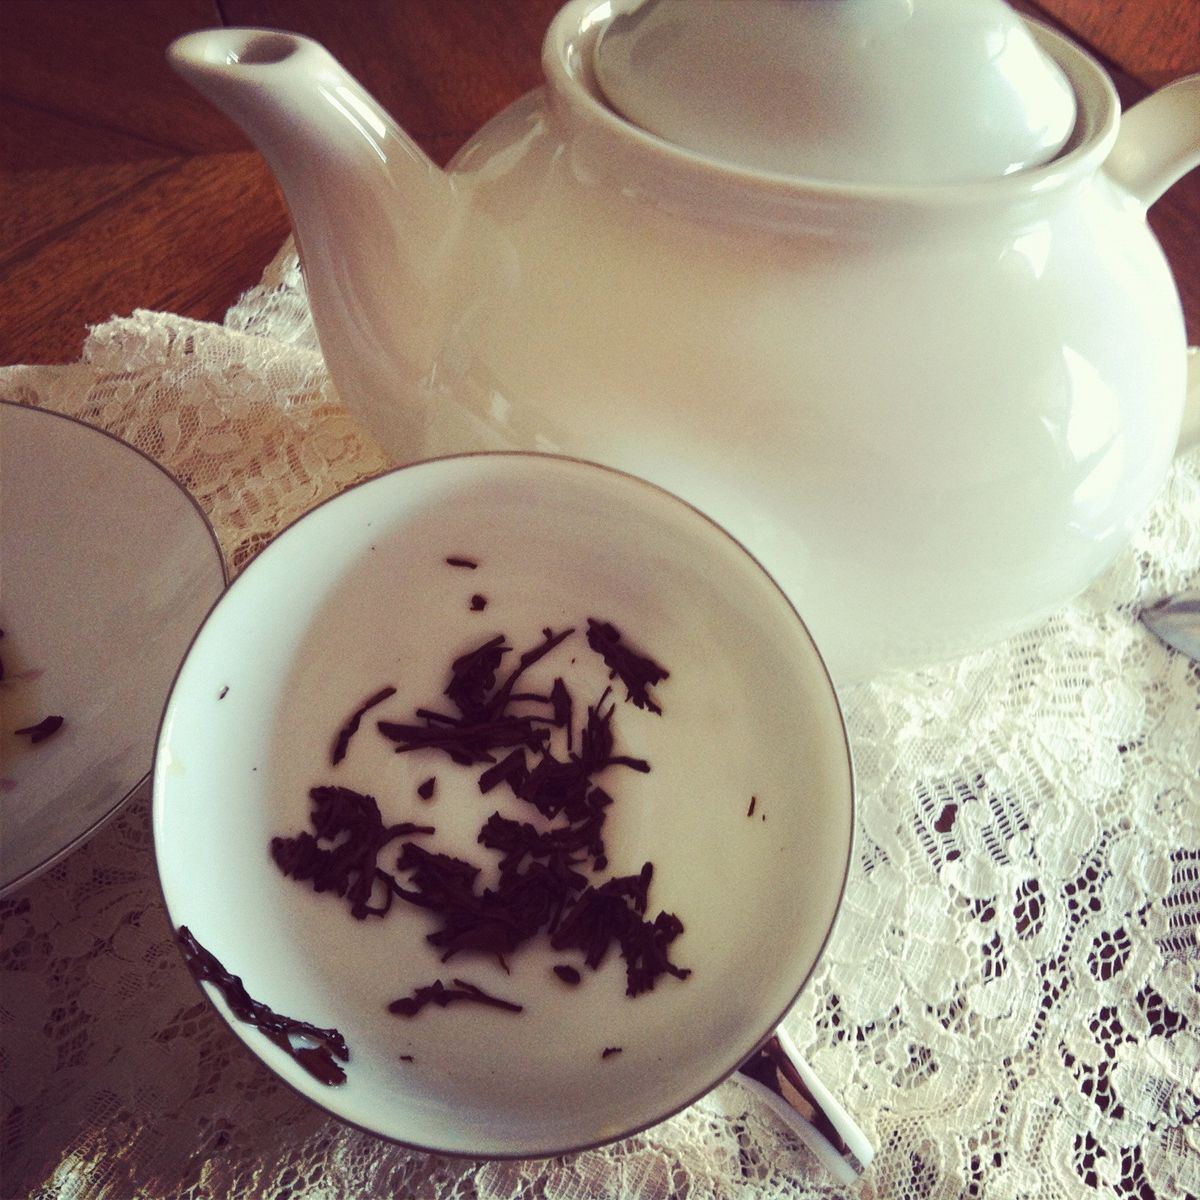 How to Read Tea Leaves